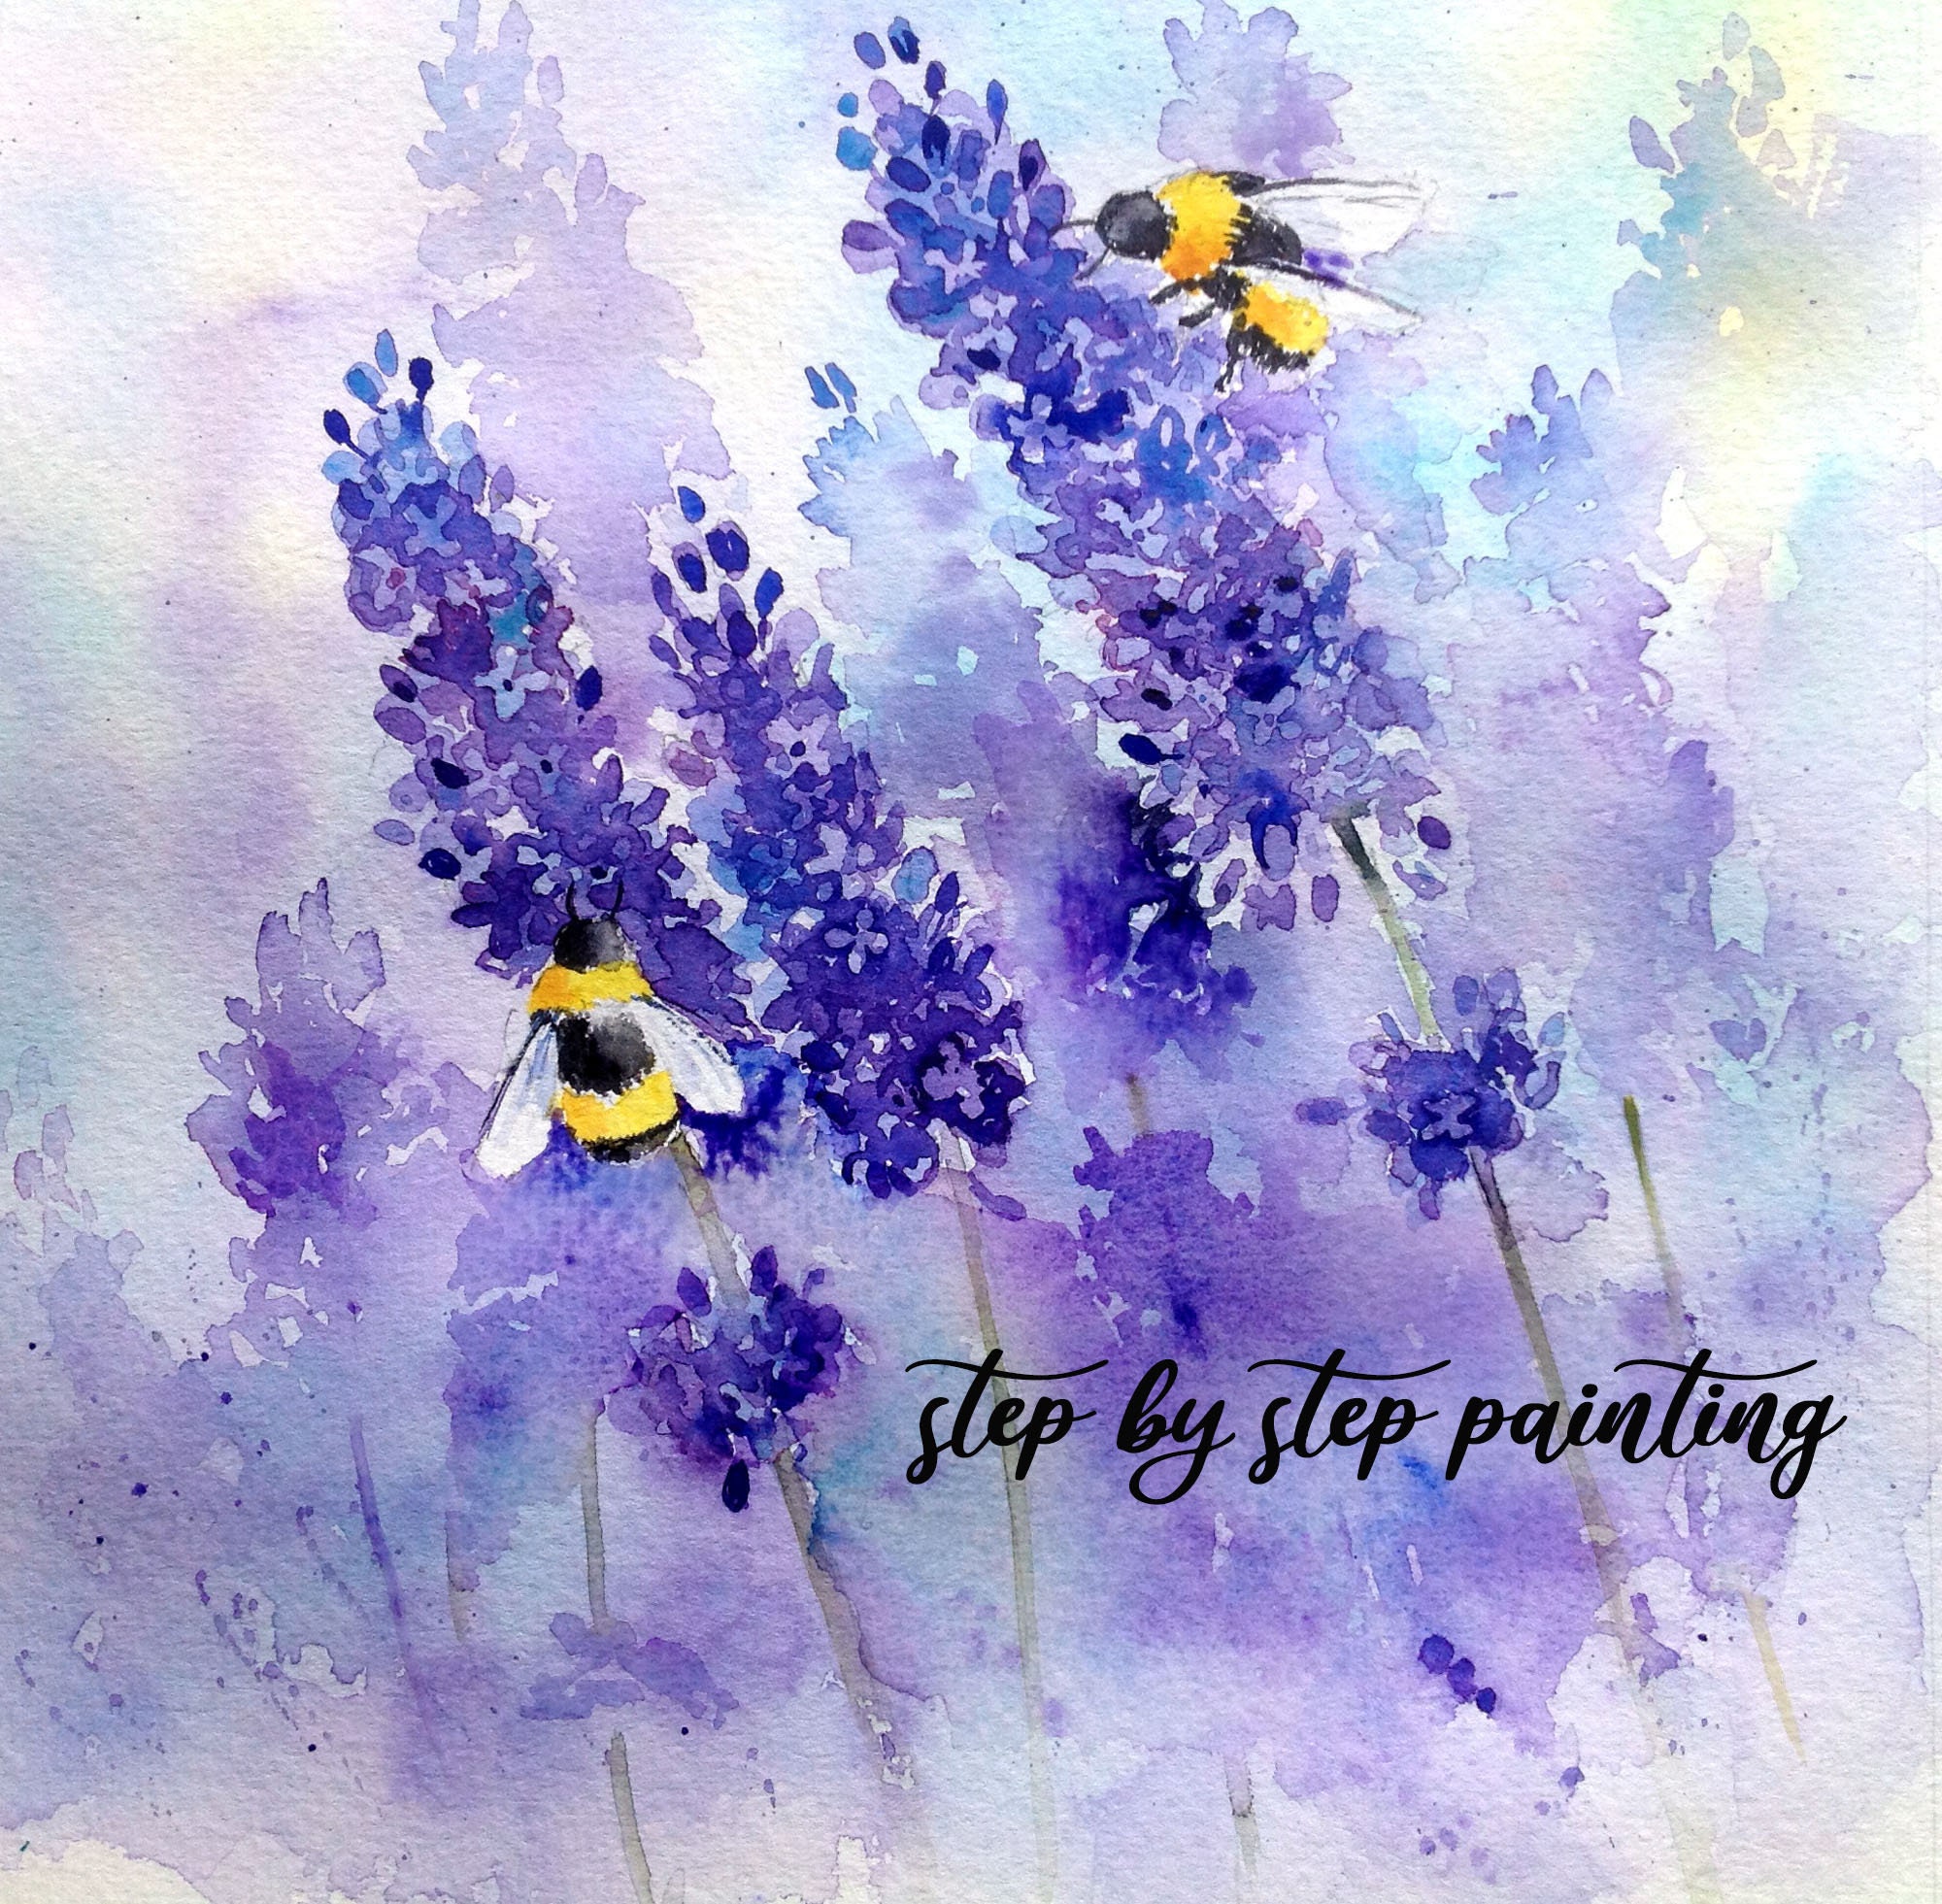 How To Paint Lavender: Easy Flower Painting Tutorial for Beginners